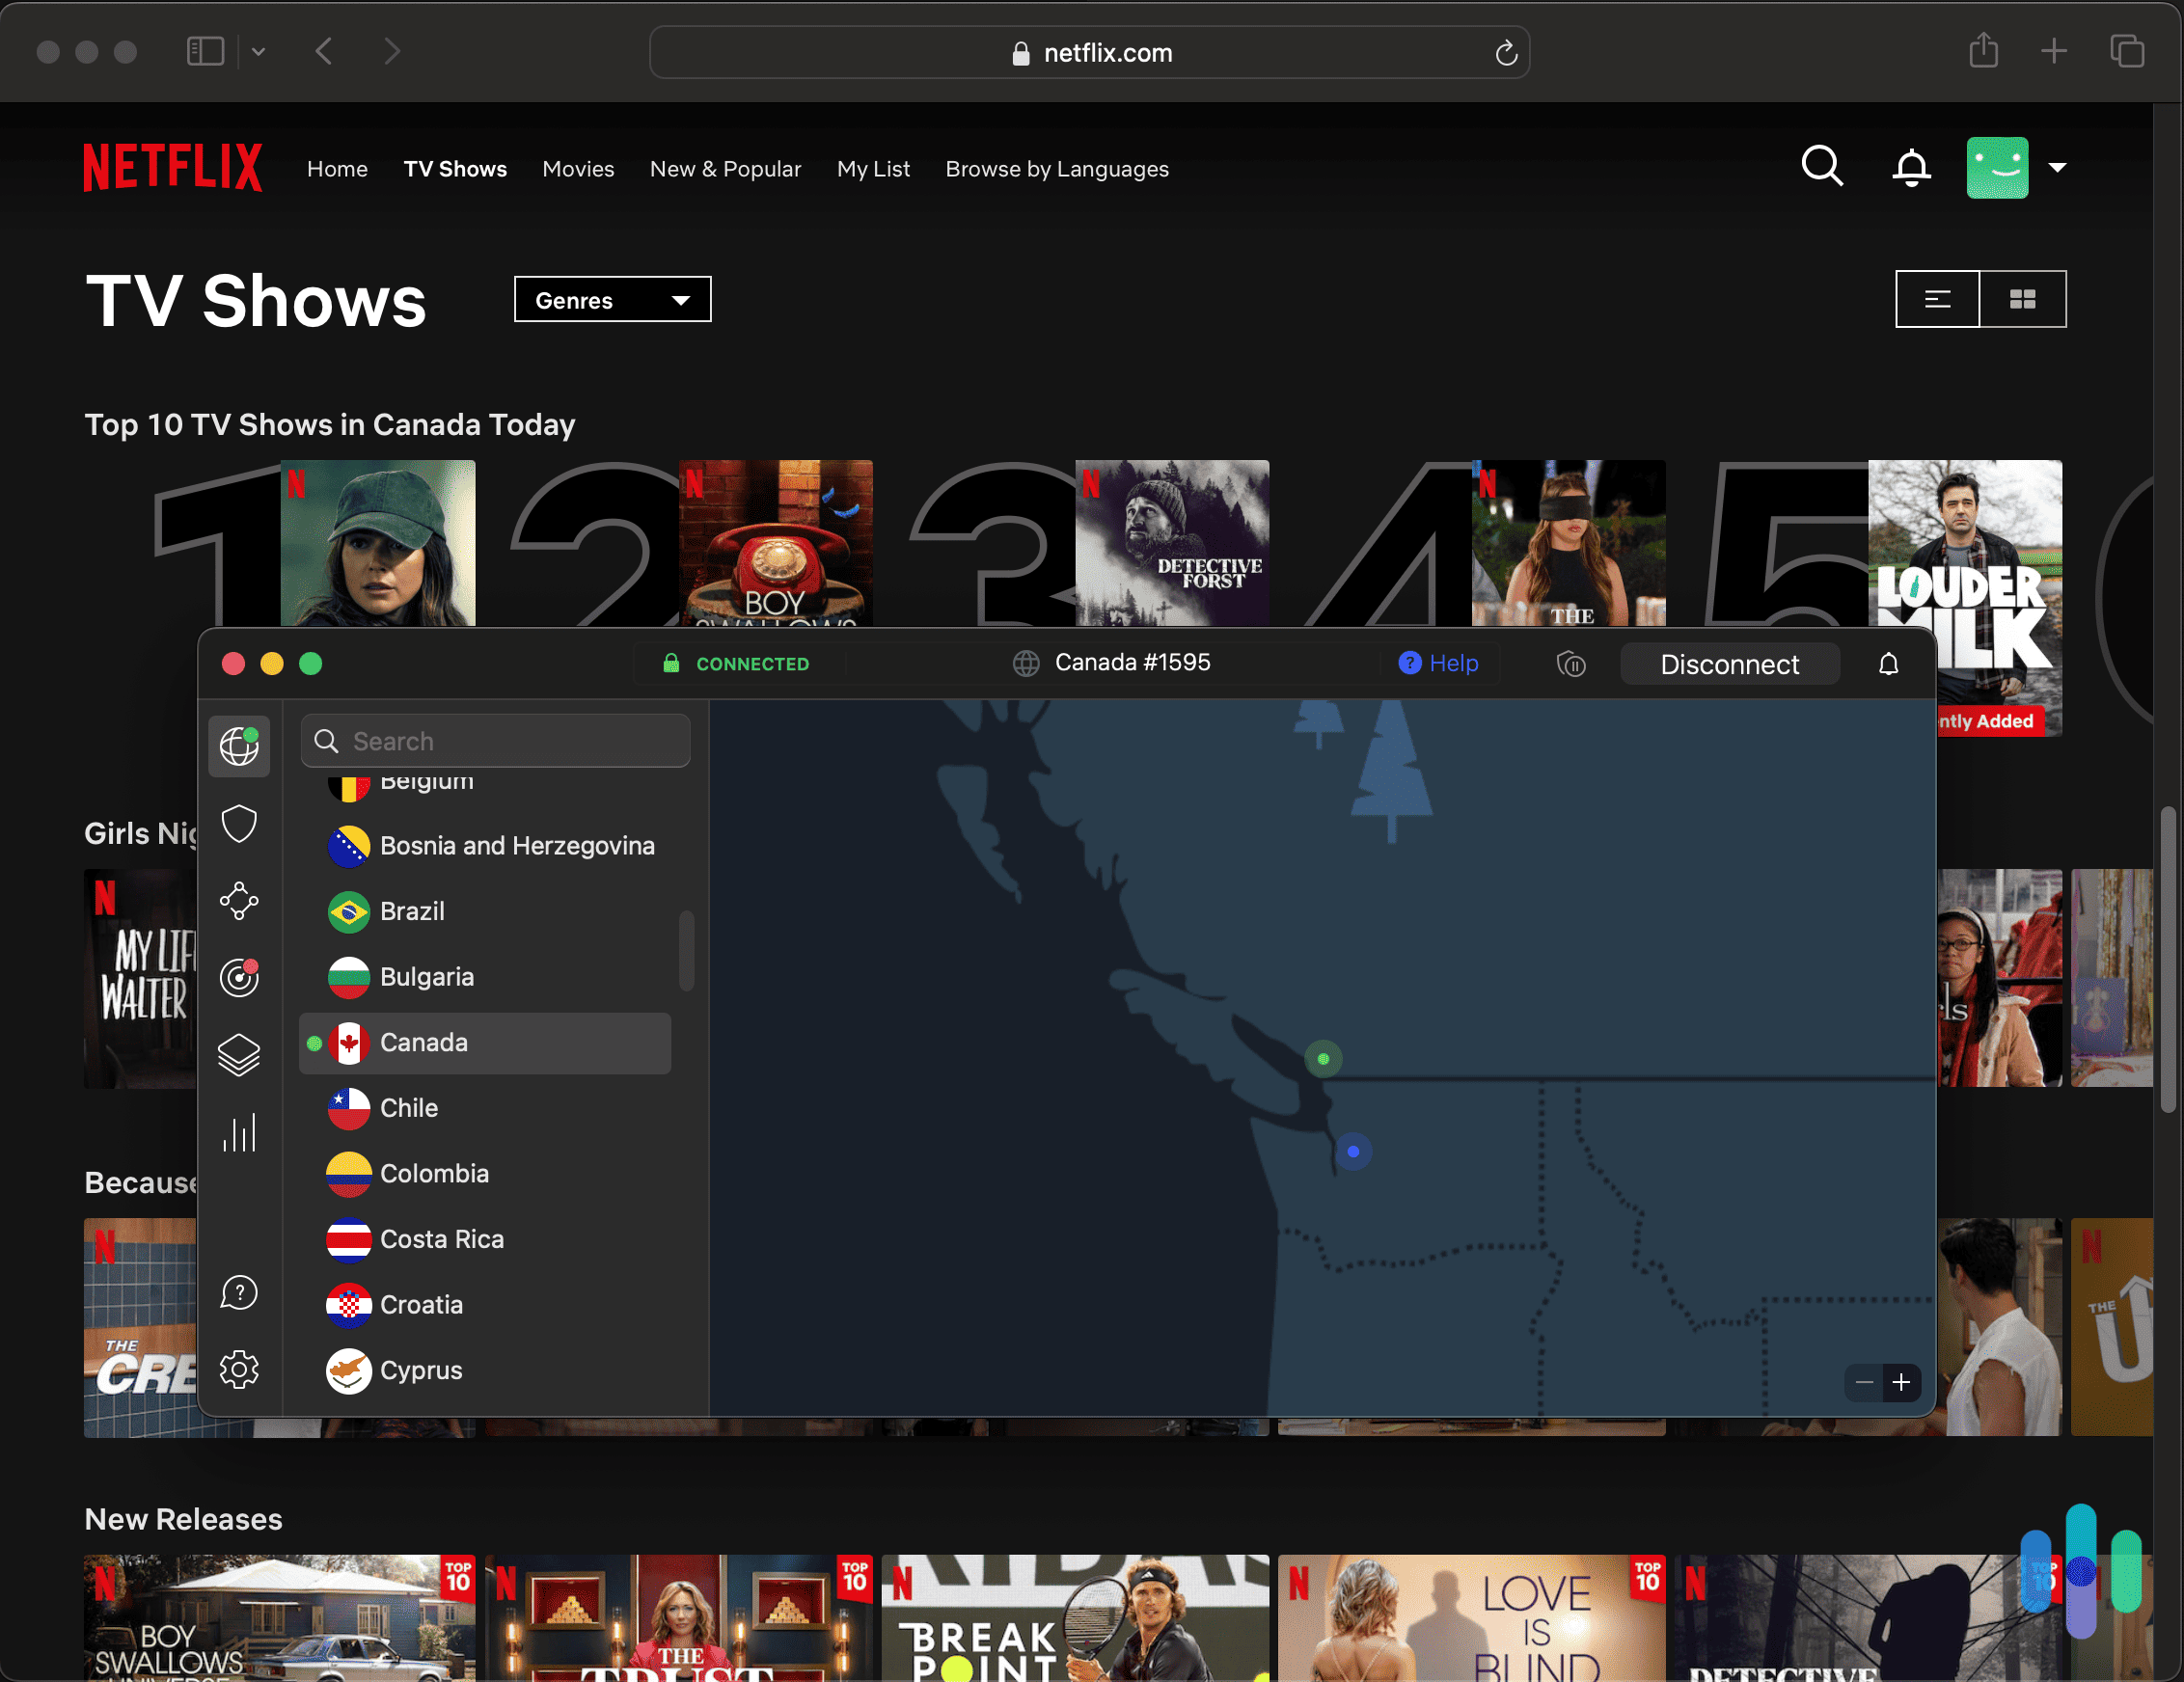 Using Safari with NordVPN while connected to Canada and browsing Netflix